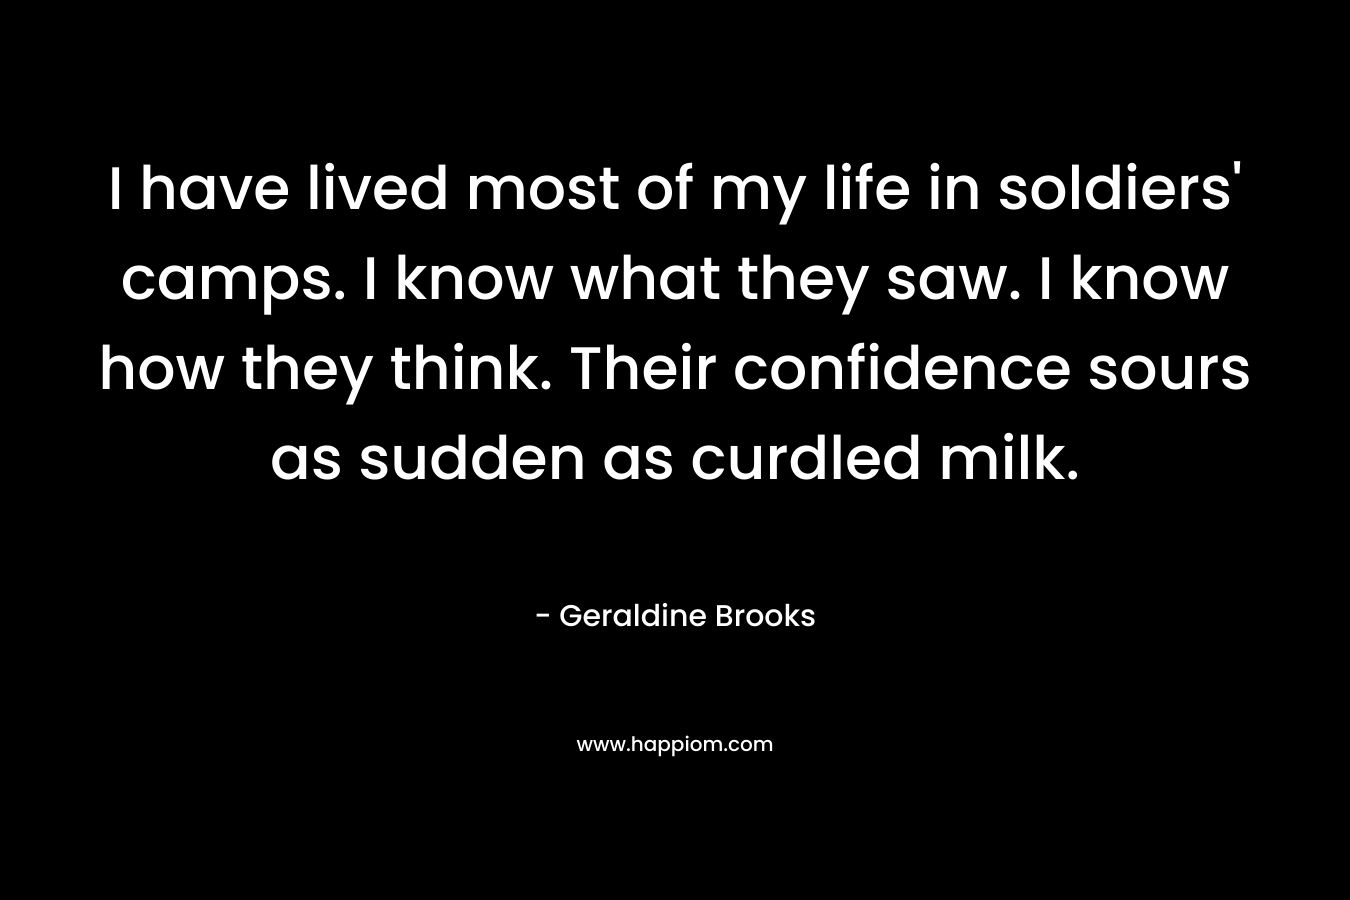 I have lived most of my life in soldiers' camps. I know what they saw. I know how they think. Their confidence sours as sudden as curdled milk.